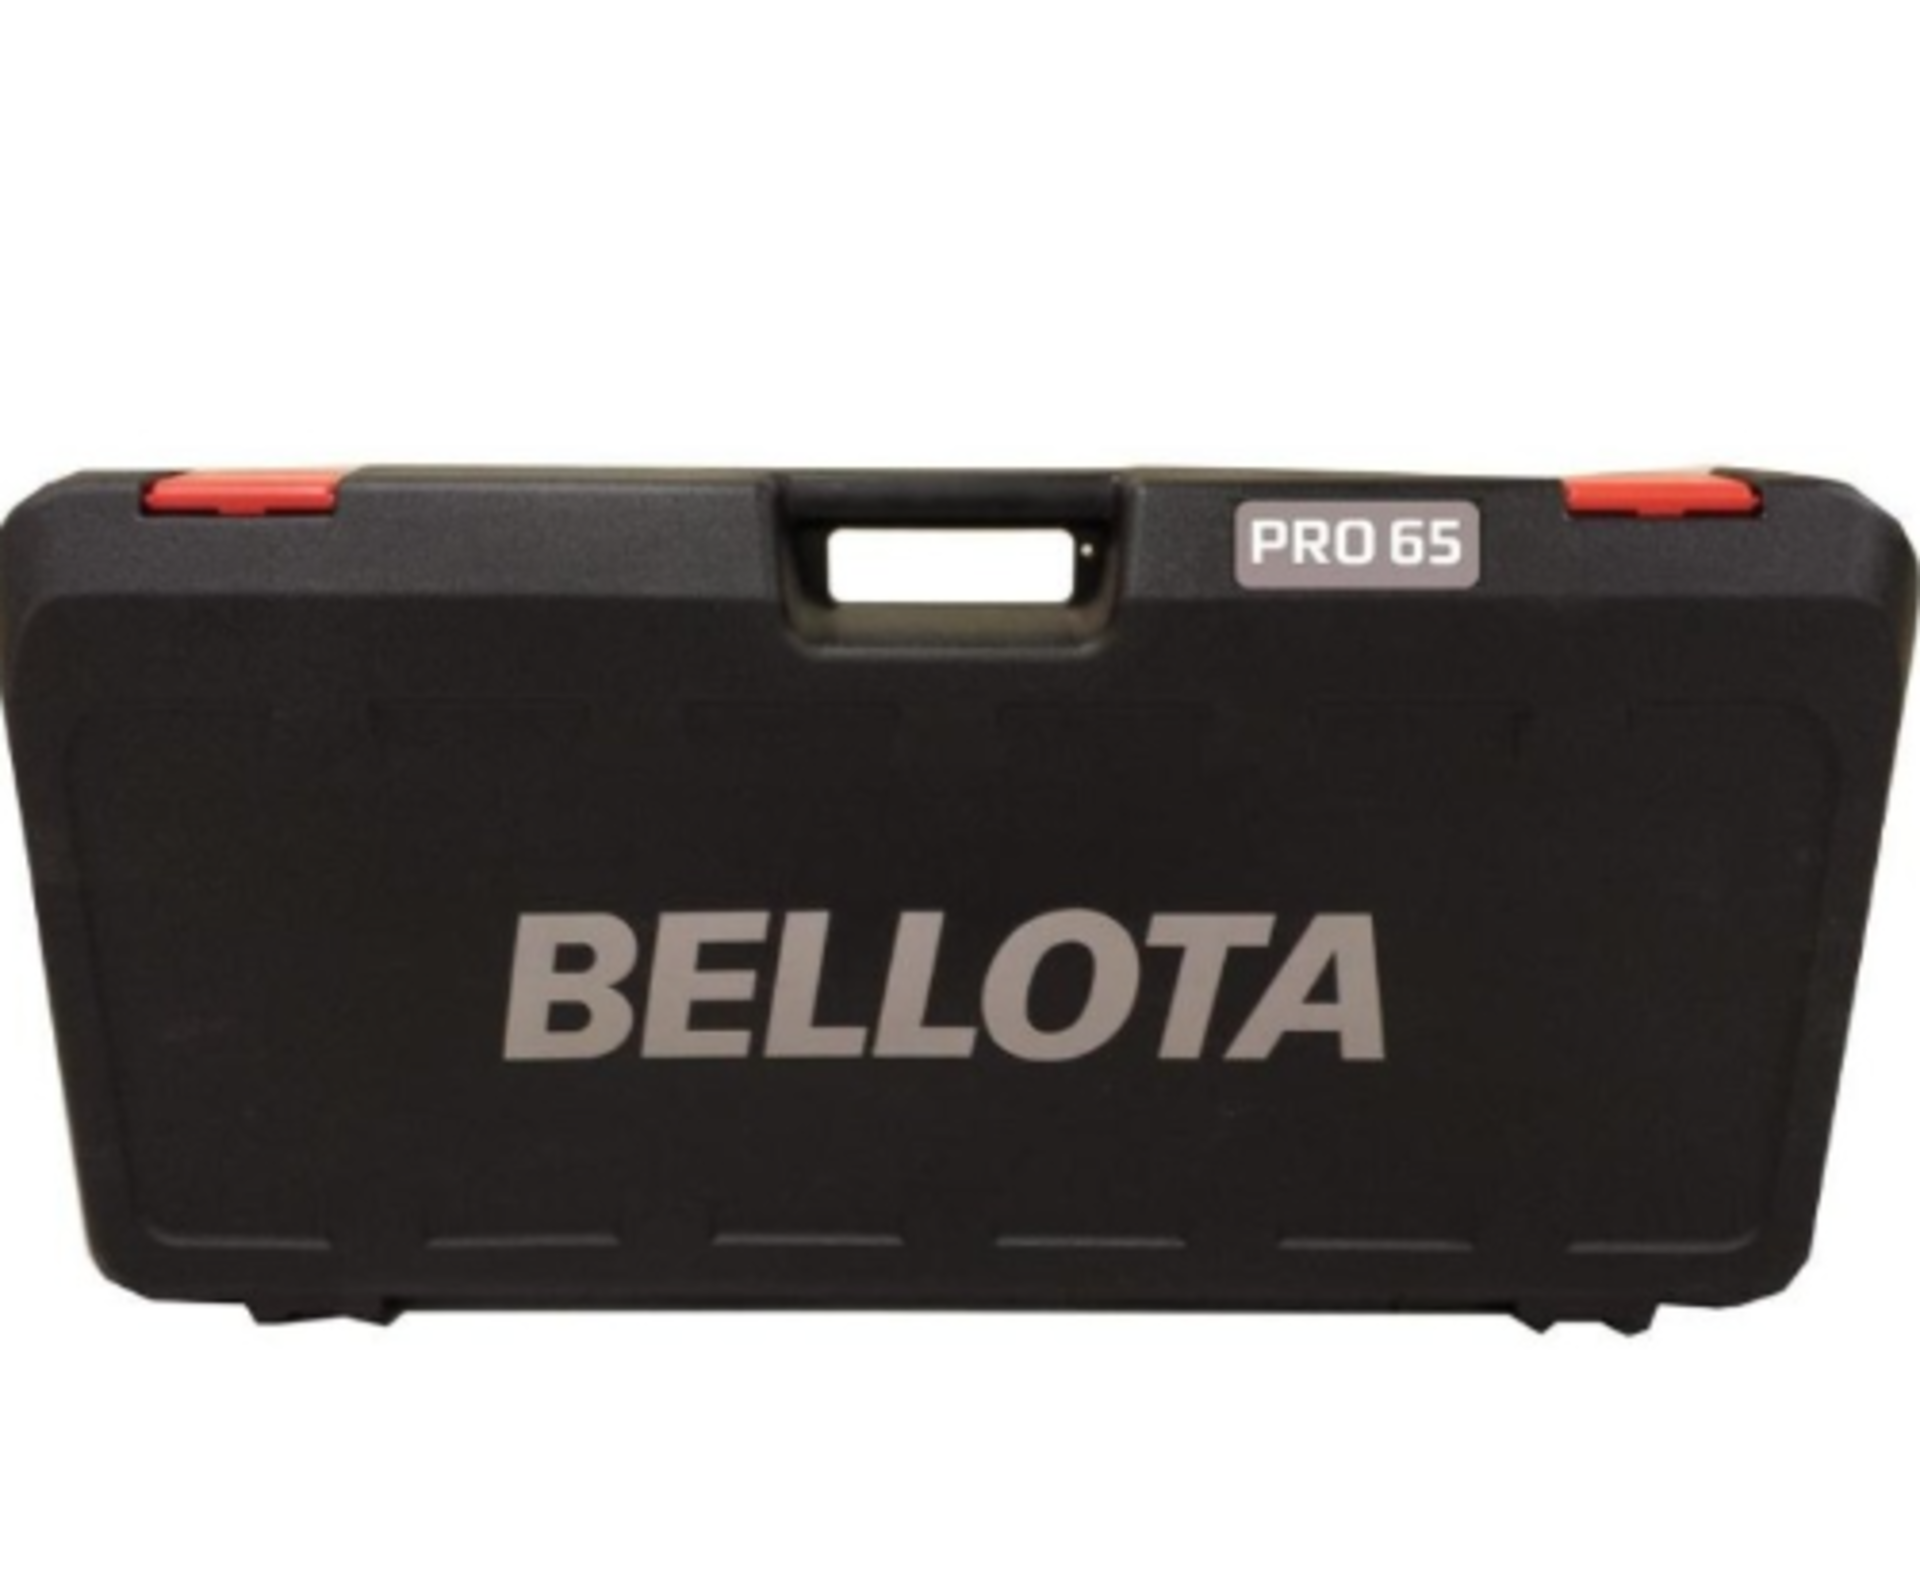 Bellota - Professional-65 Tile Cutter - New With Carry Case. - Image 2 of 2